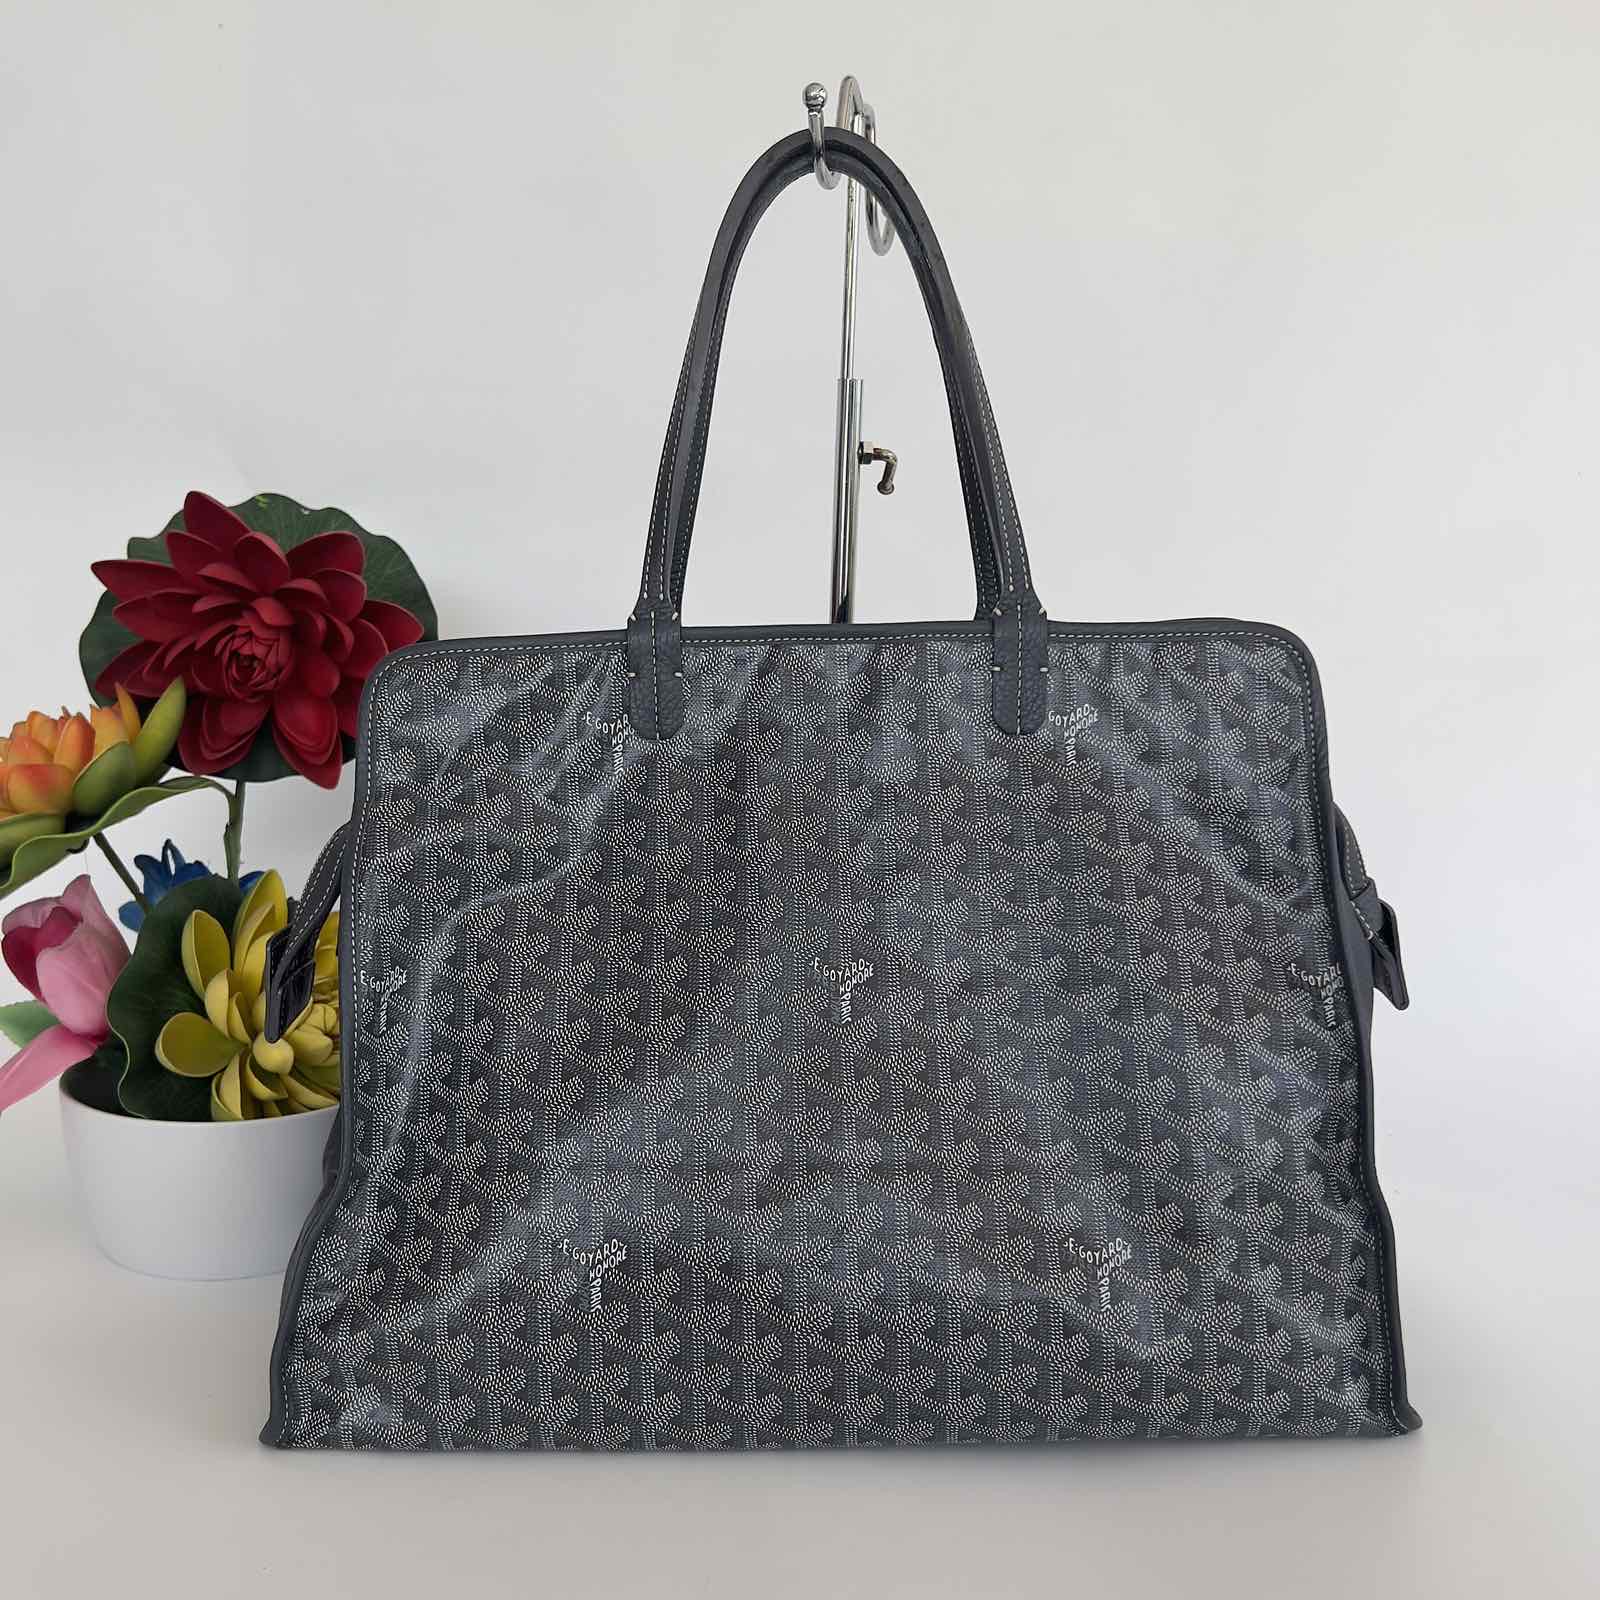 Goyard Gray Sac Hardy. Made in France. With pouch & dustbag ❤️